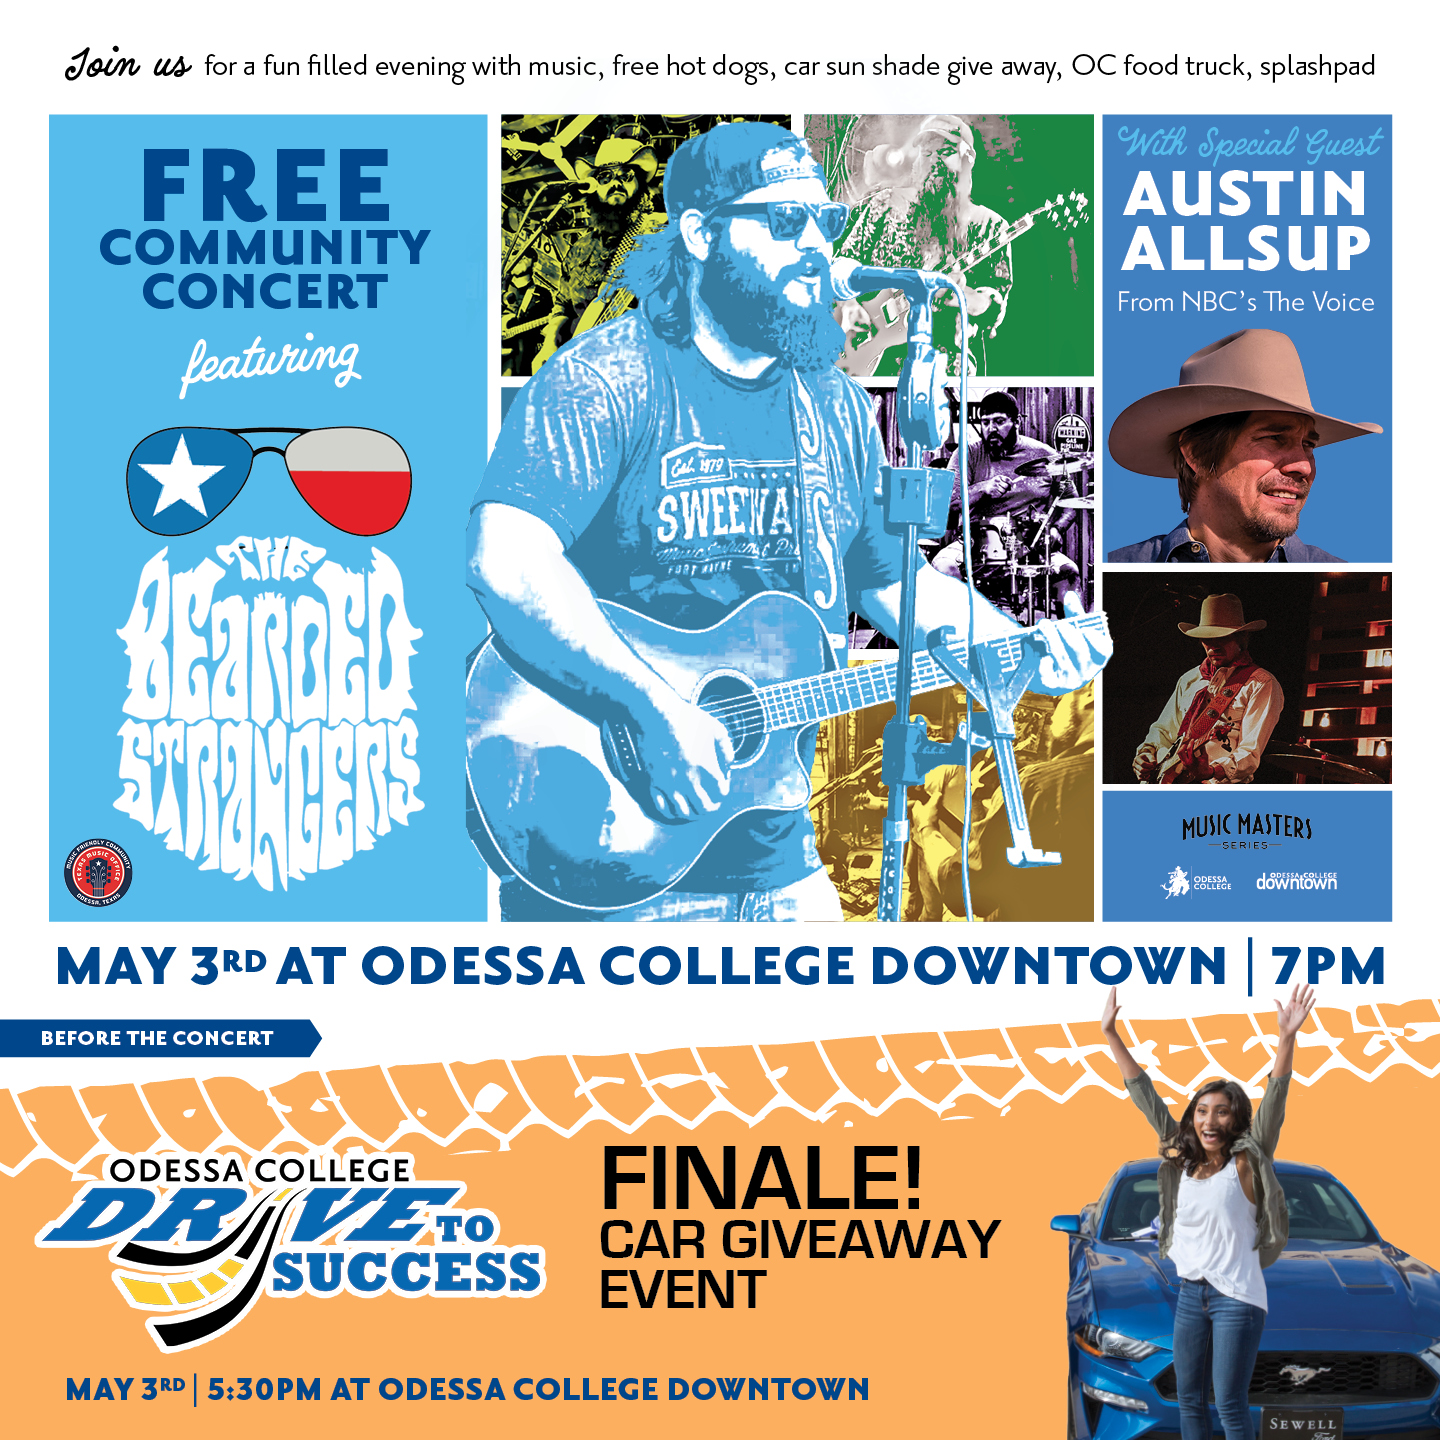 16th Annual Drive to Success and The Bearded Strangers Concert open to public for May’s First Friday ODTX Series